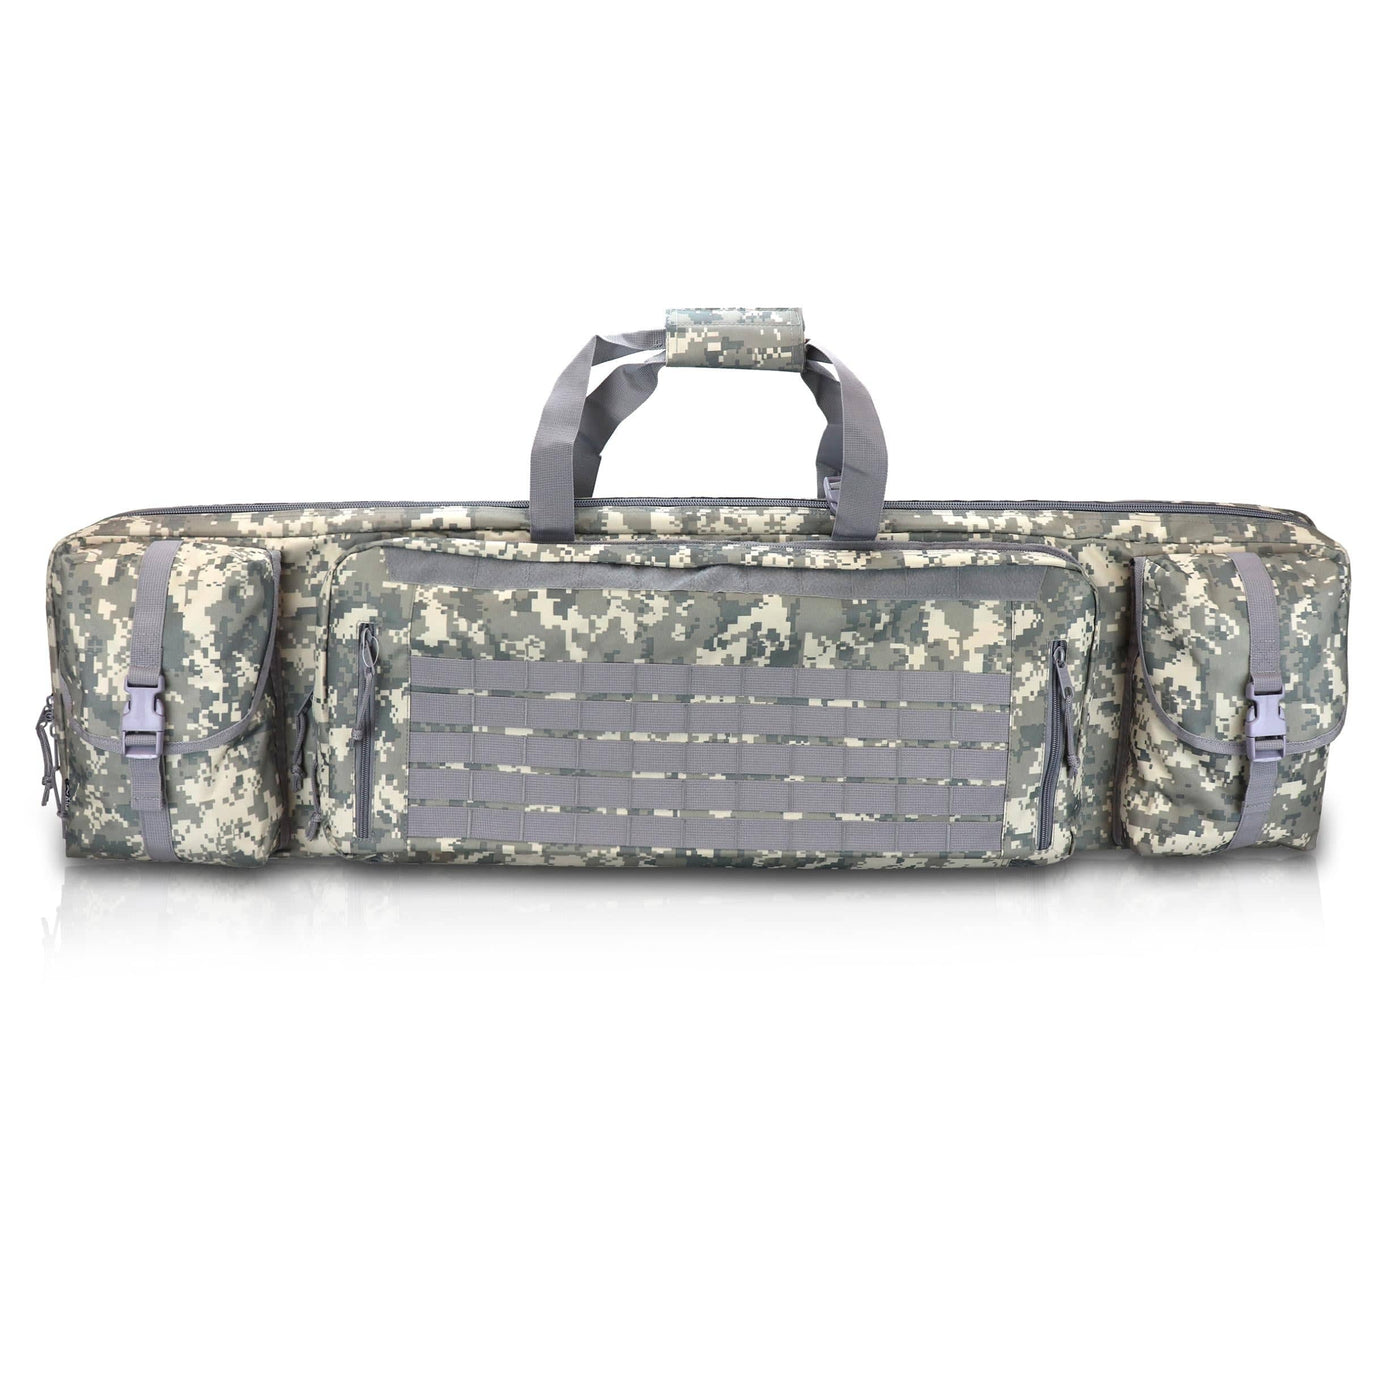 Osage River Osage River 46 in Double Rifle Case ACU Digital Camo Shooting